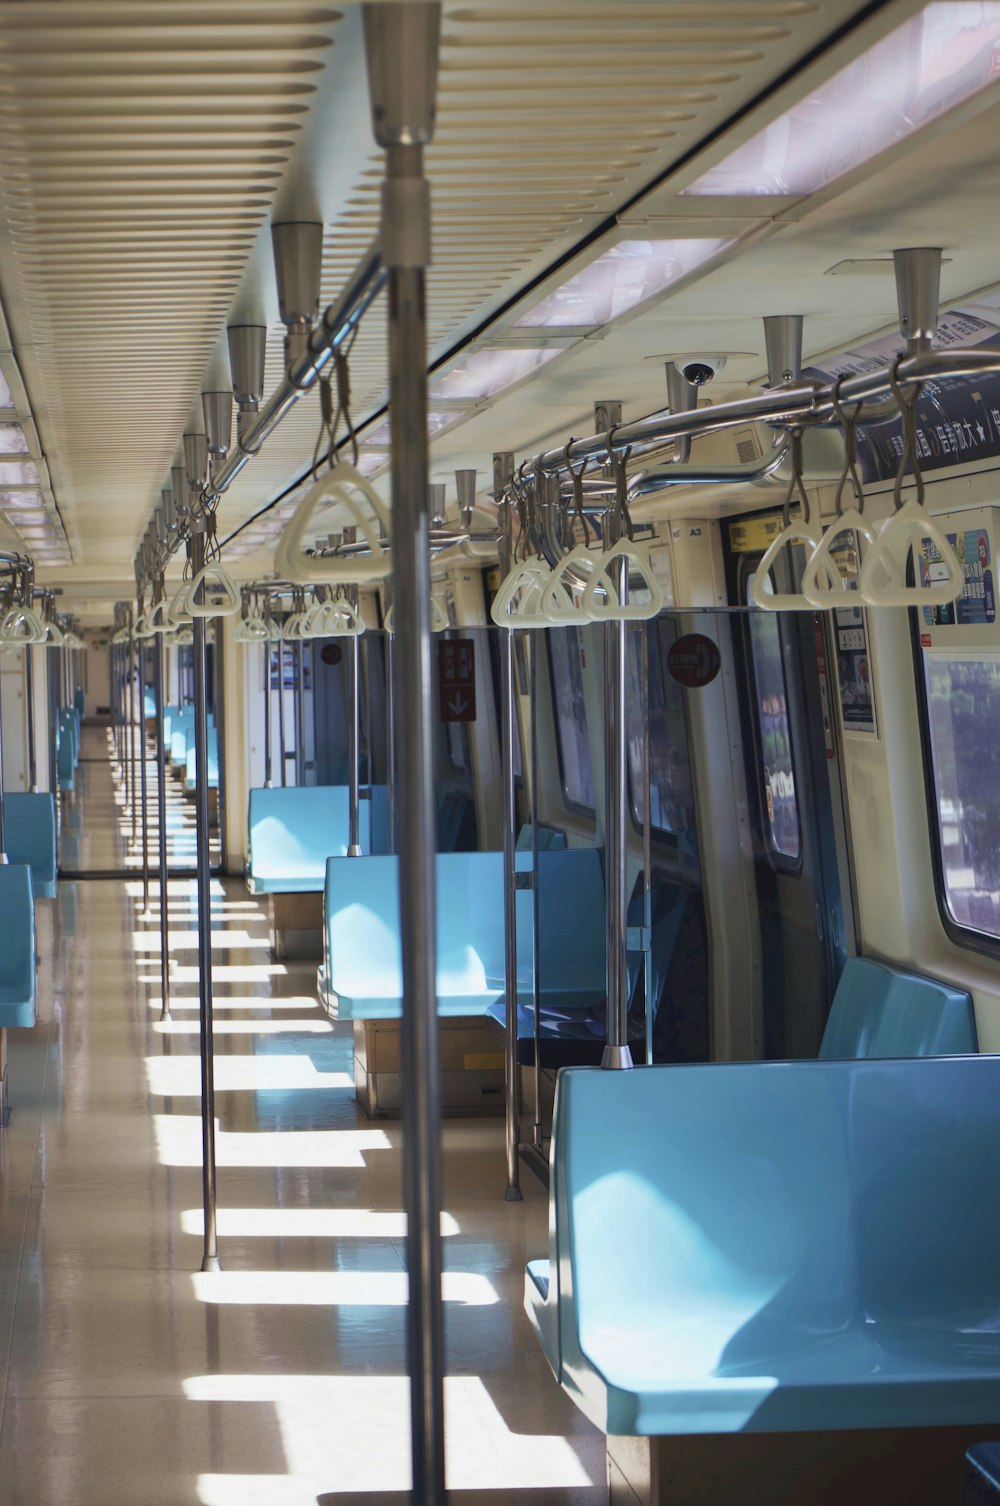 a train car filled with lots of blue seats